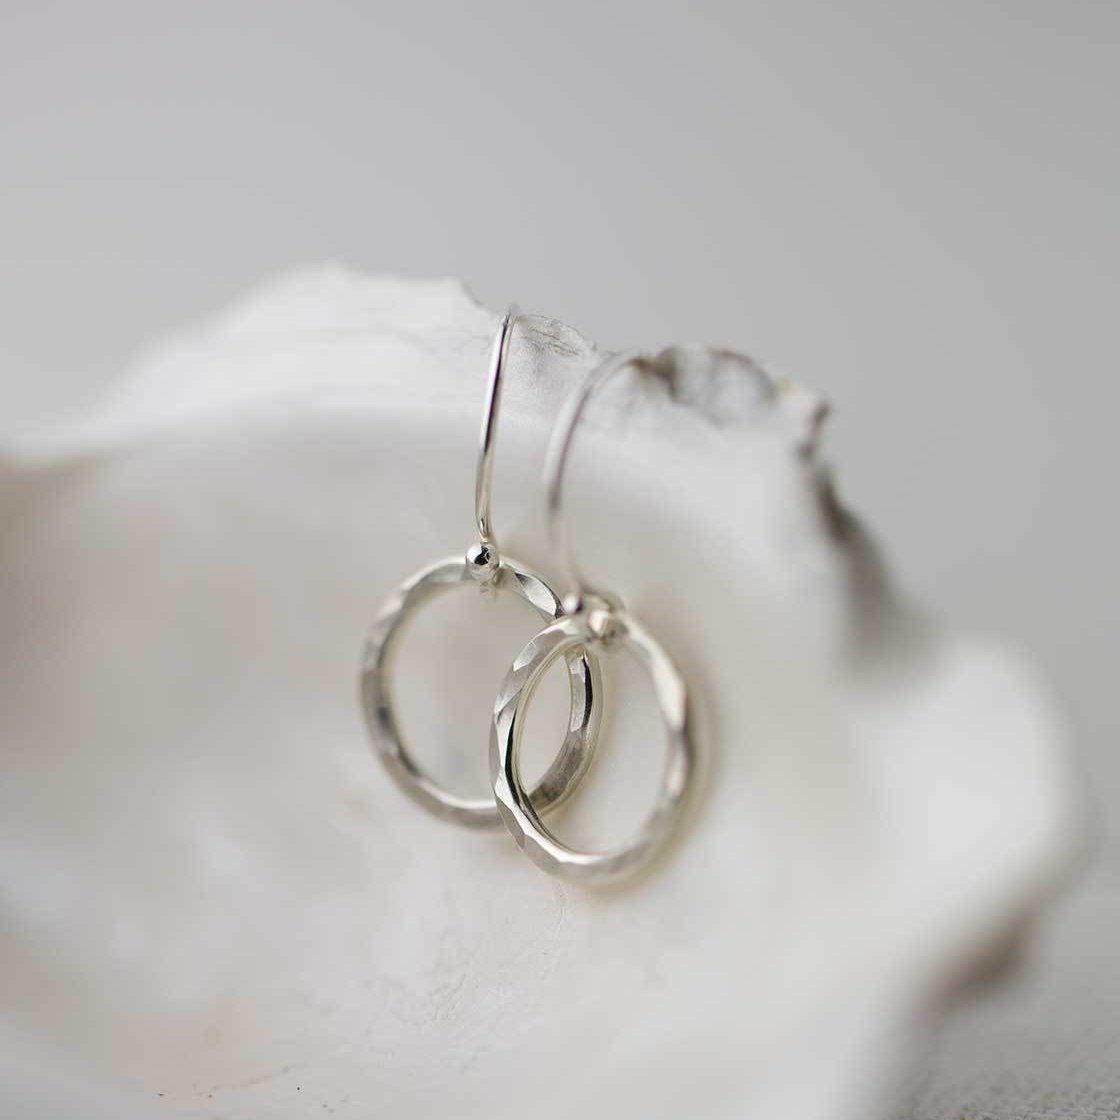 Hammered Circle Earrings - Sterling Silver - Handmade Jewelry by Burnish